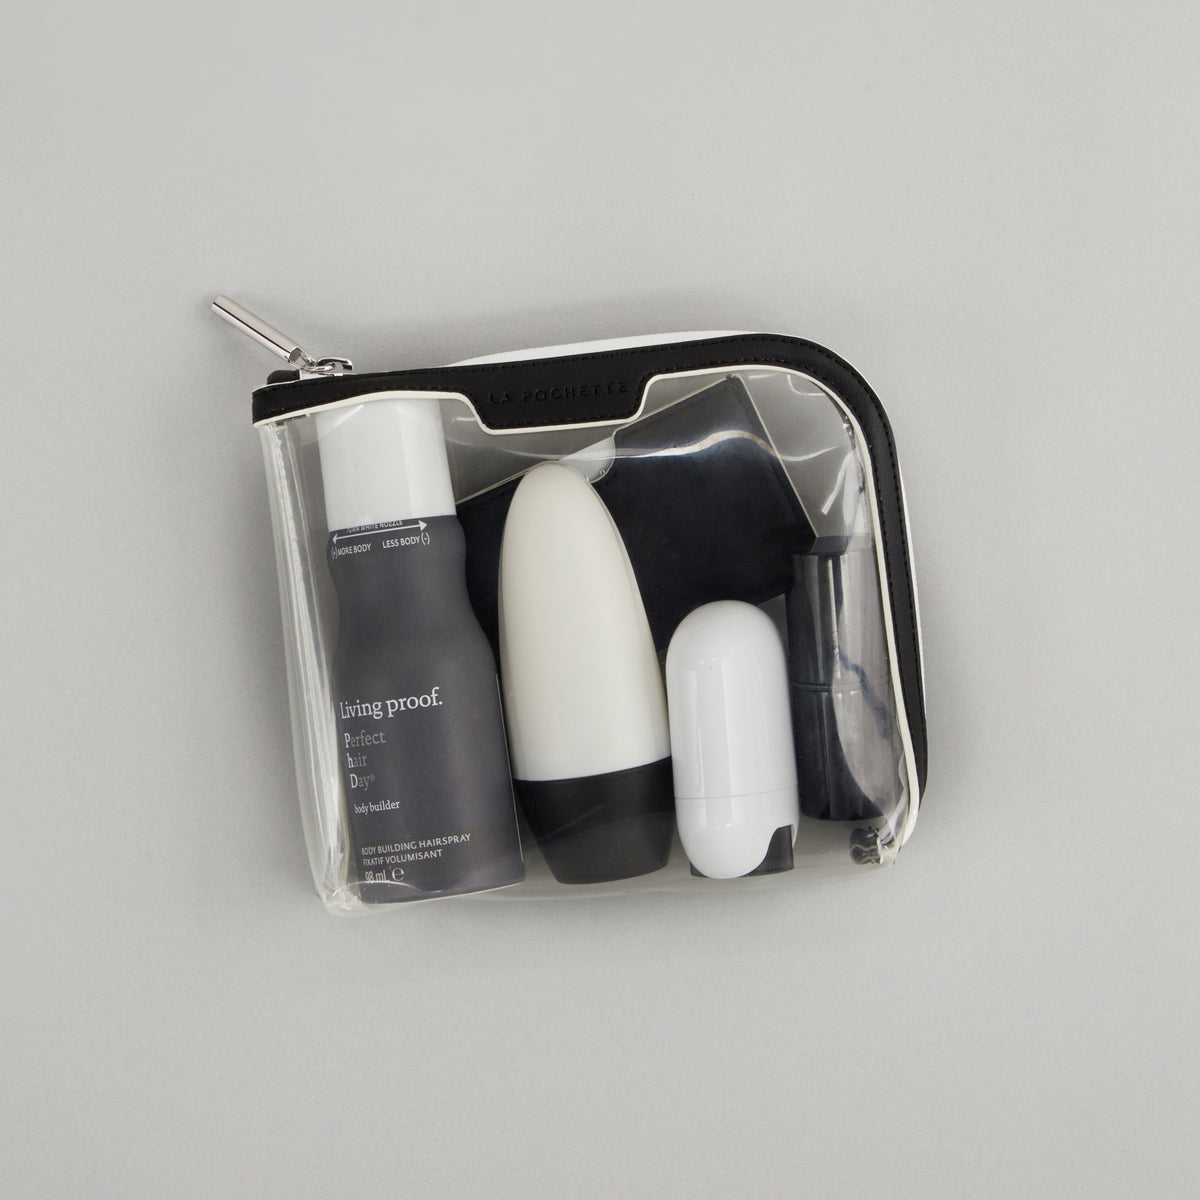 Small Anywhere Everywhere Pouch in Ink White colourway contains beauty accessories 